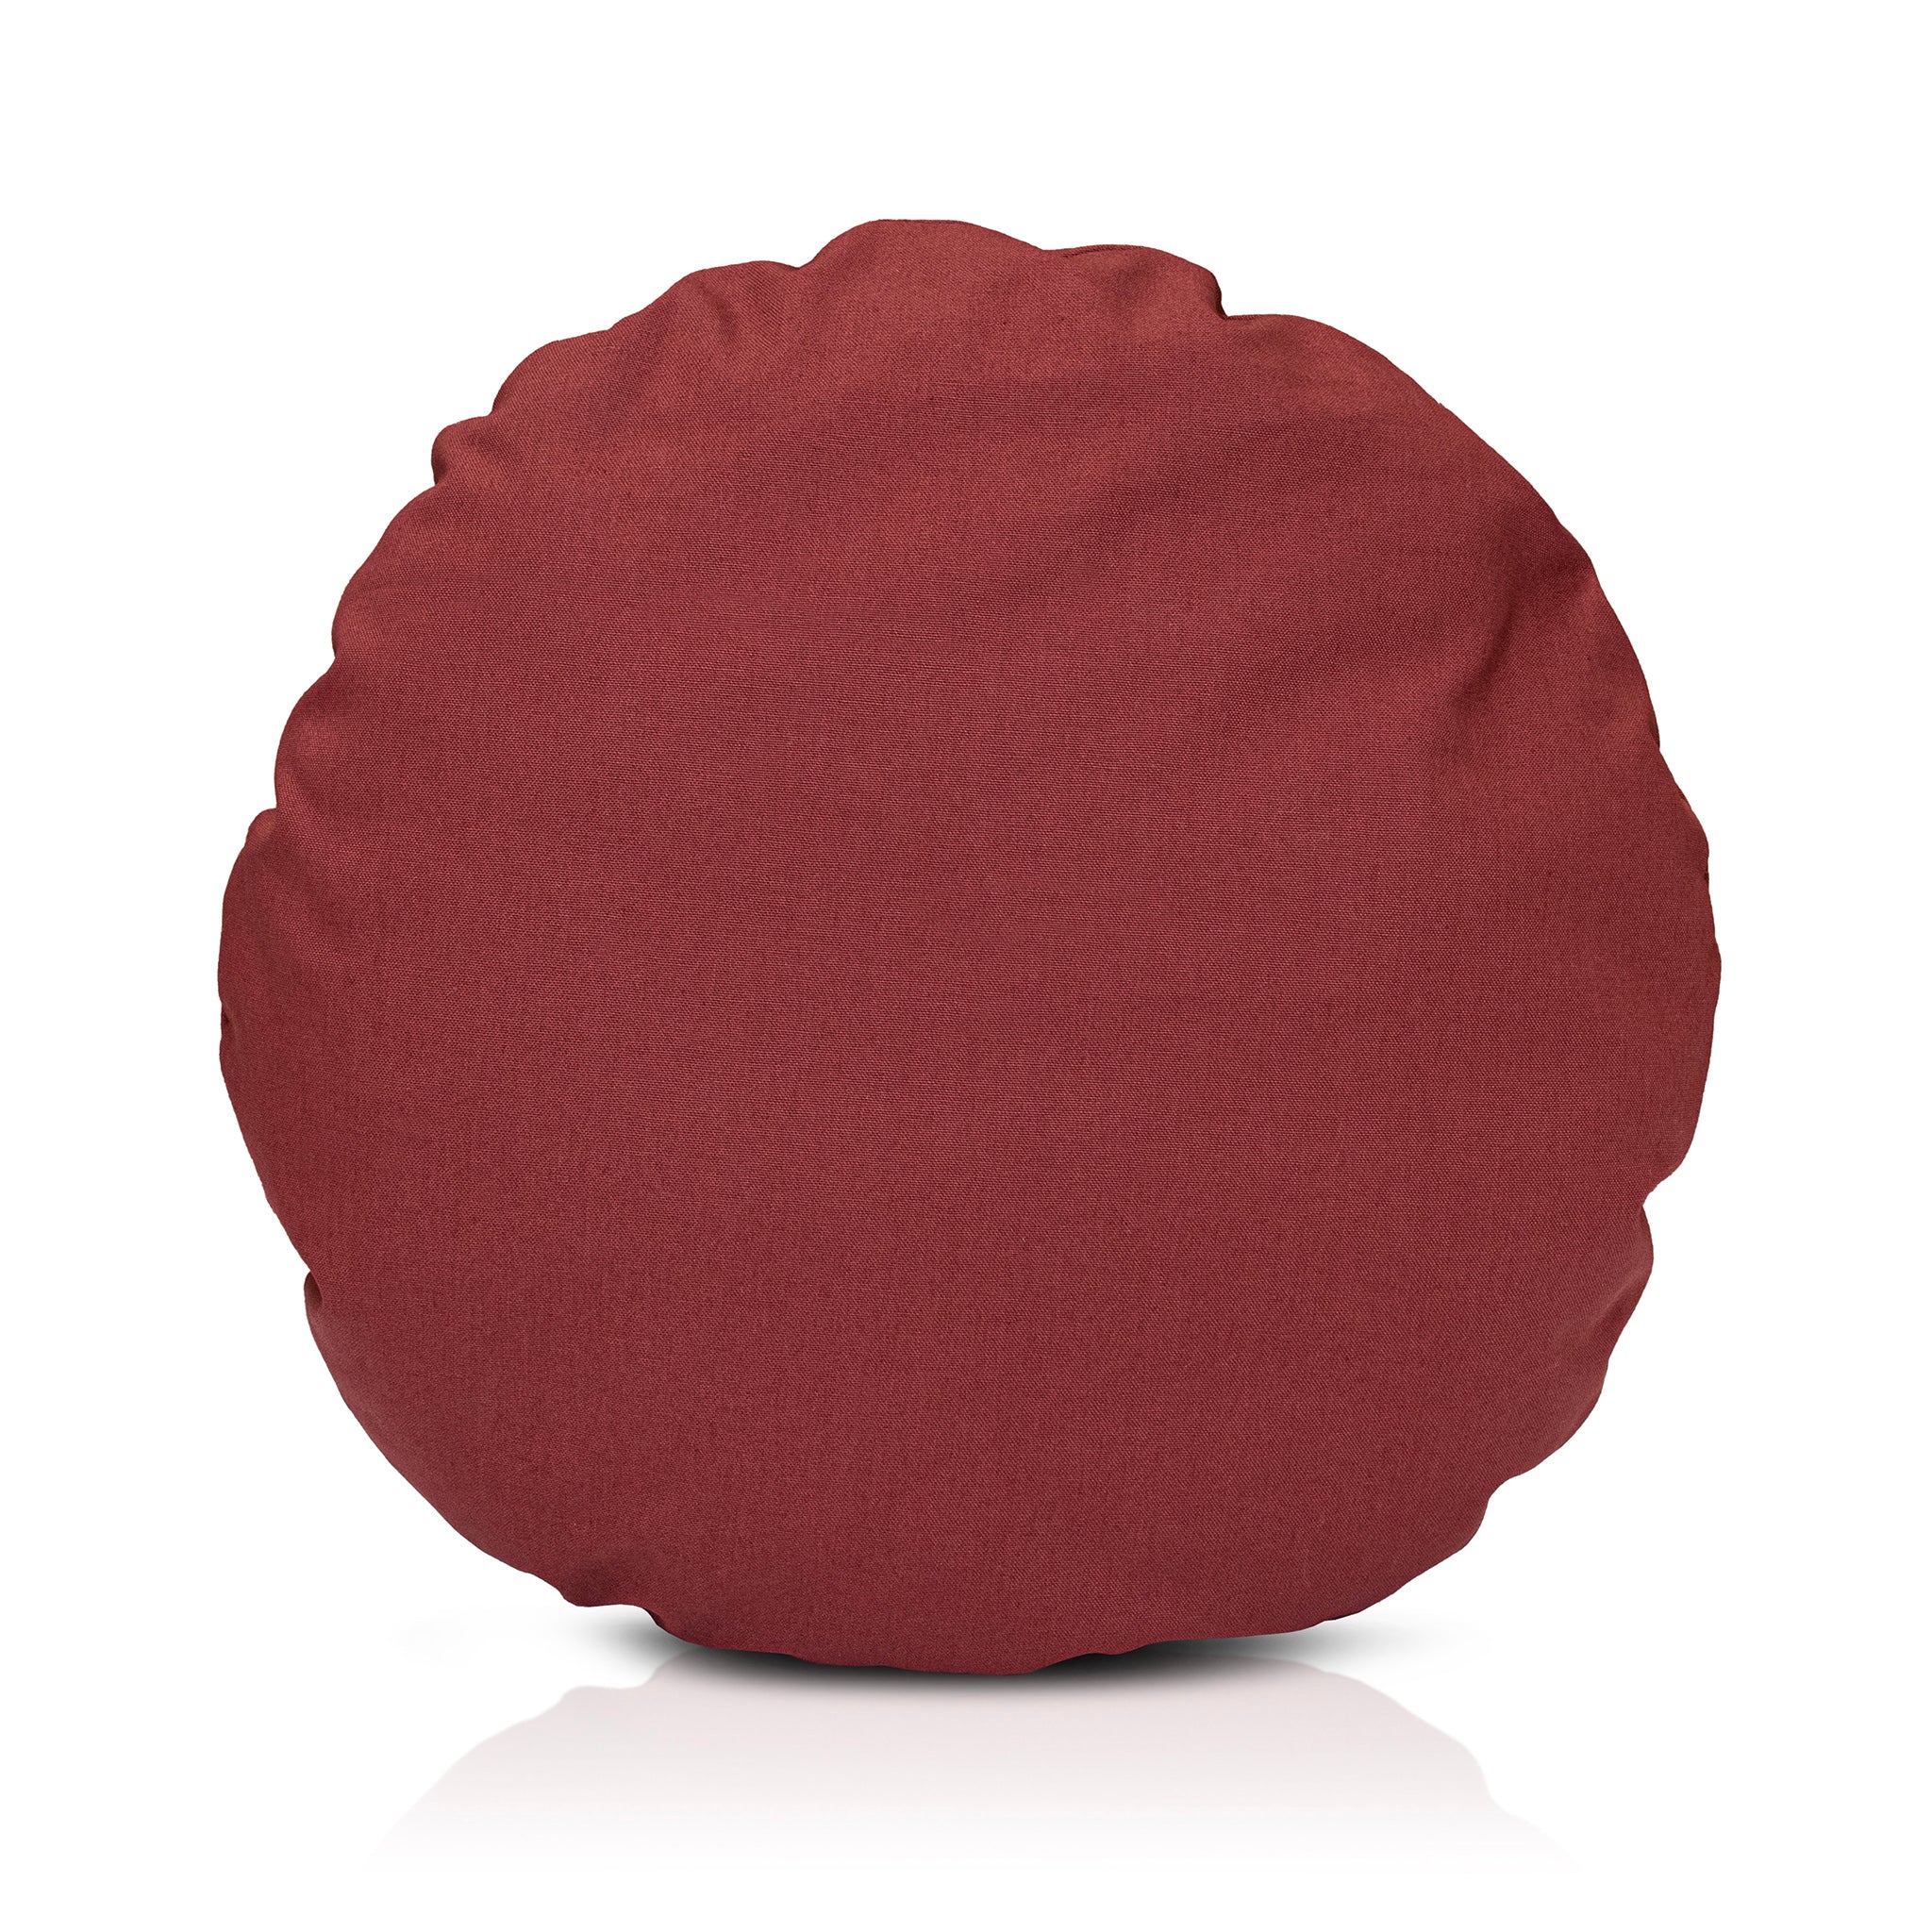 A chimney sheep PetSnug wool filled cushion. The wool cushion sits upon a white background. This is a large red cushion.